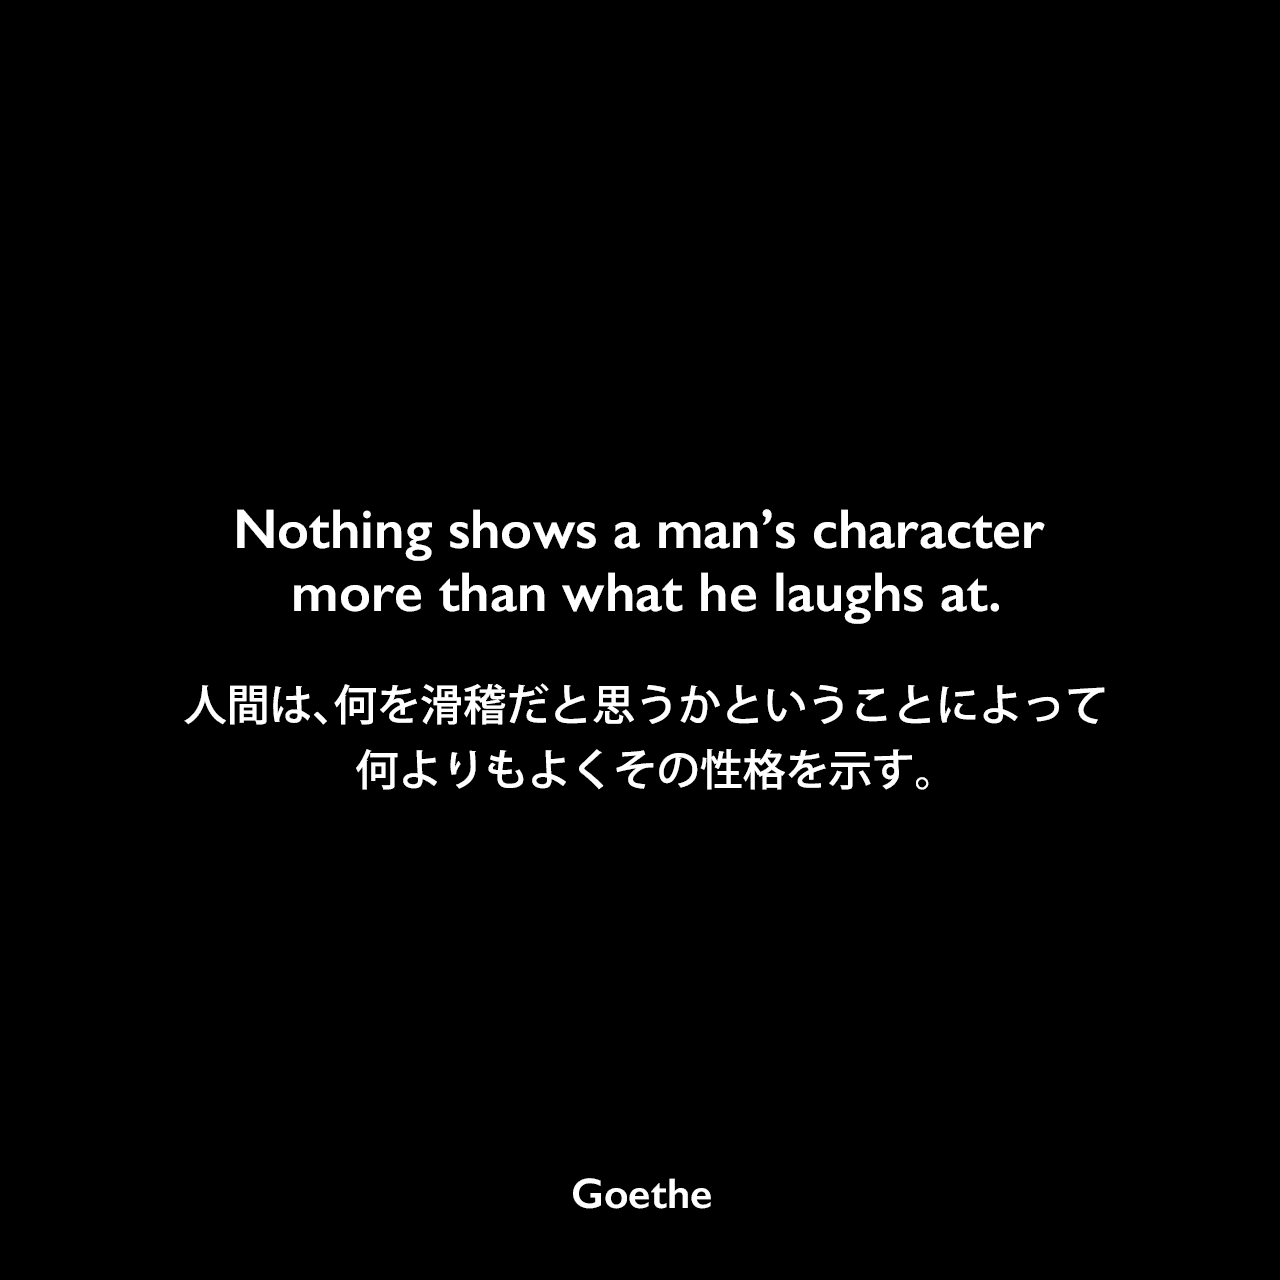 Nothing shows a man’s character more than what he laughs at.人間は、何を滑稽だと思うかということによって、何よりもよくその性格を示す。Johann Wolfgang von Goethe